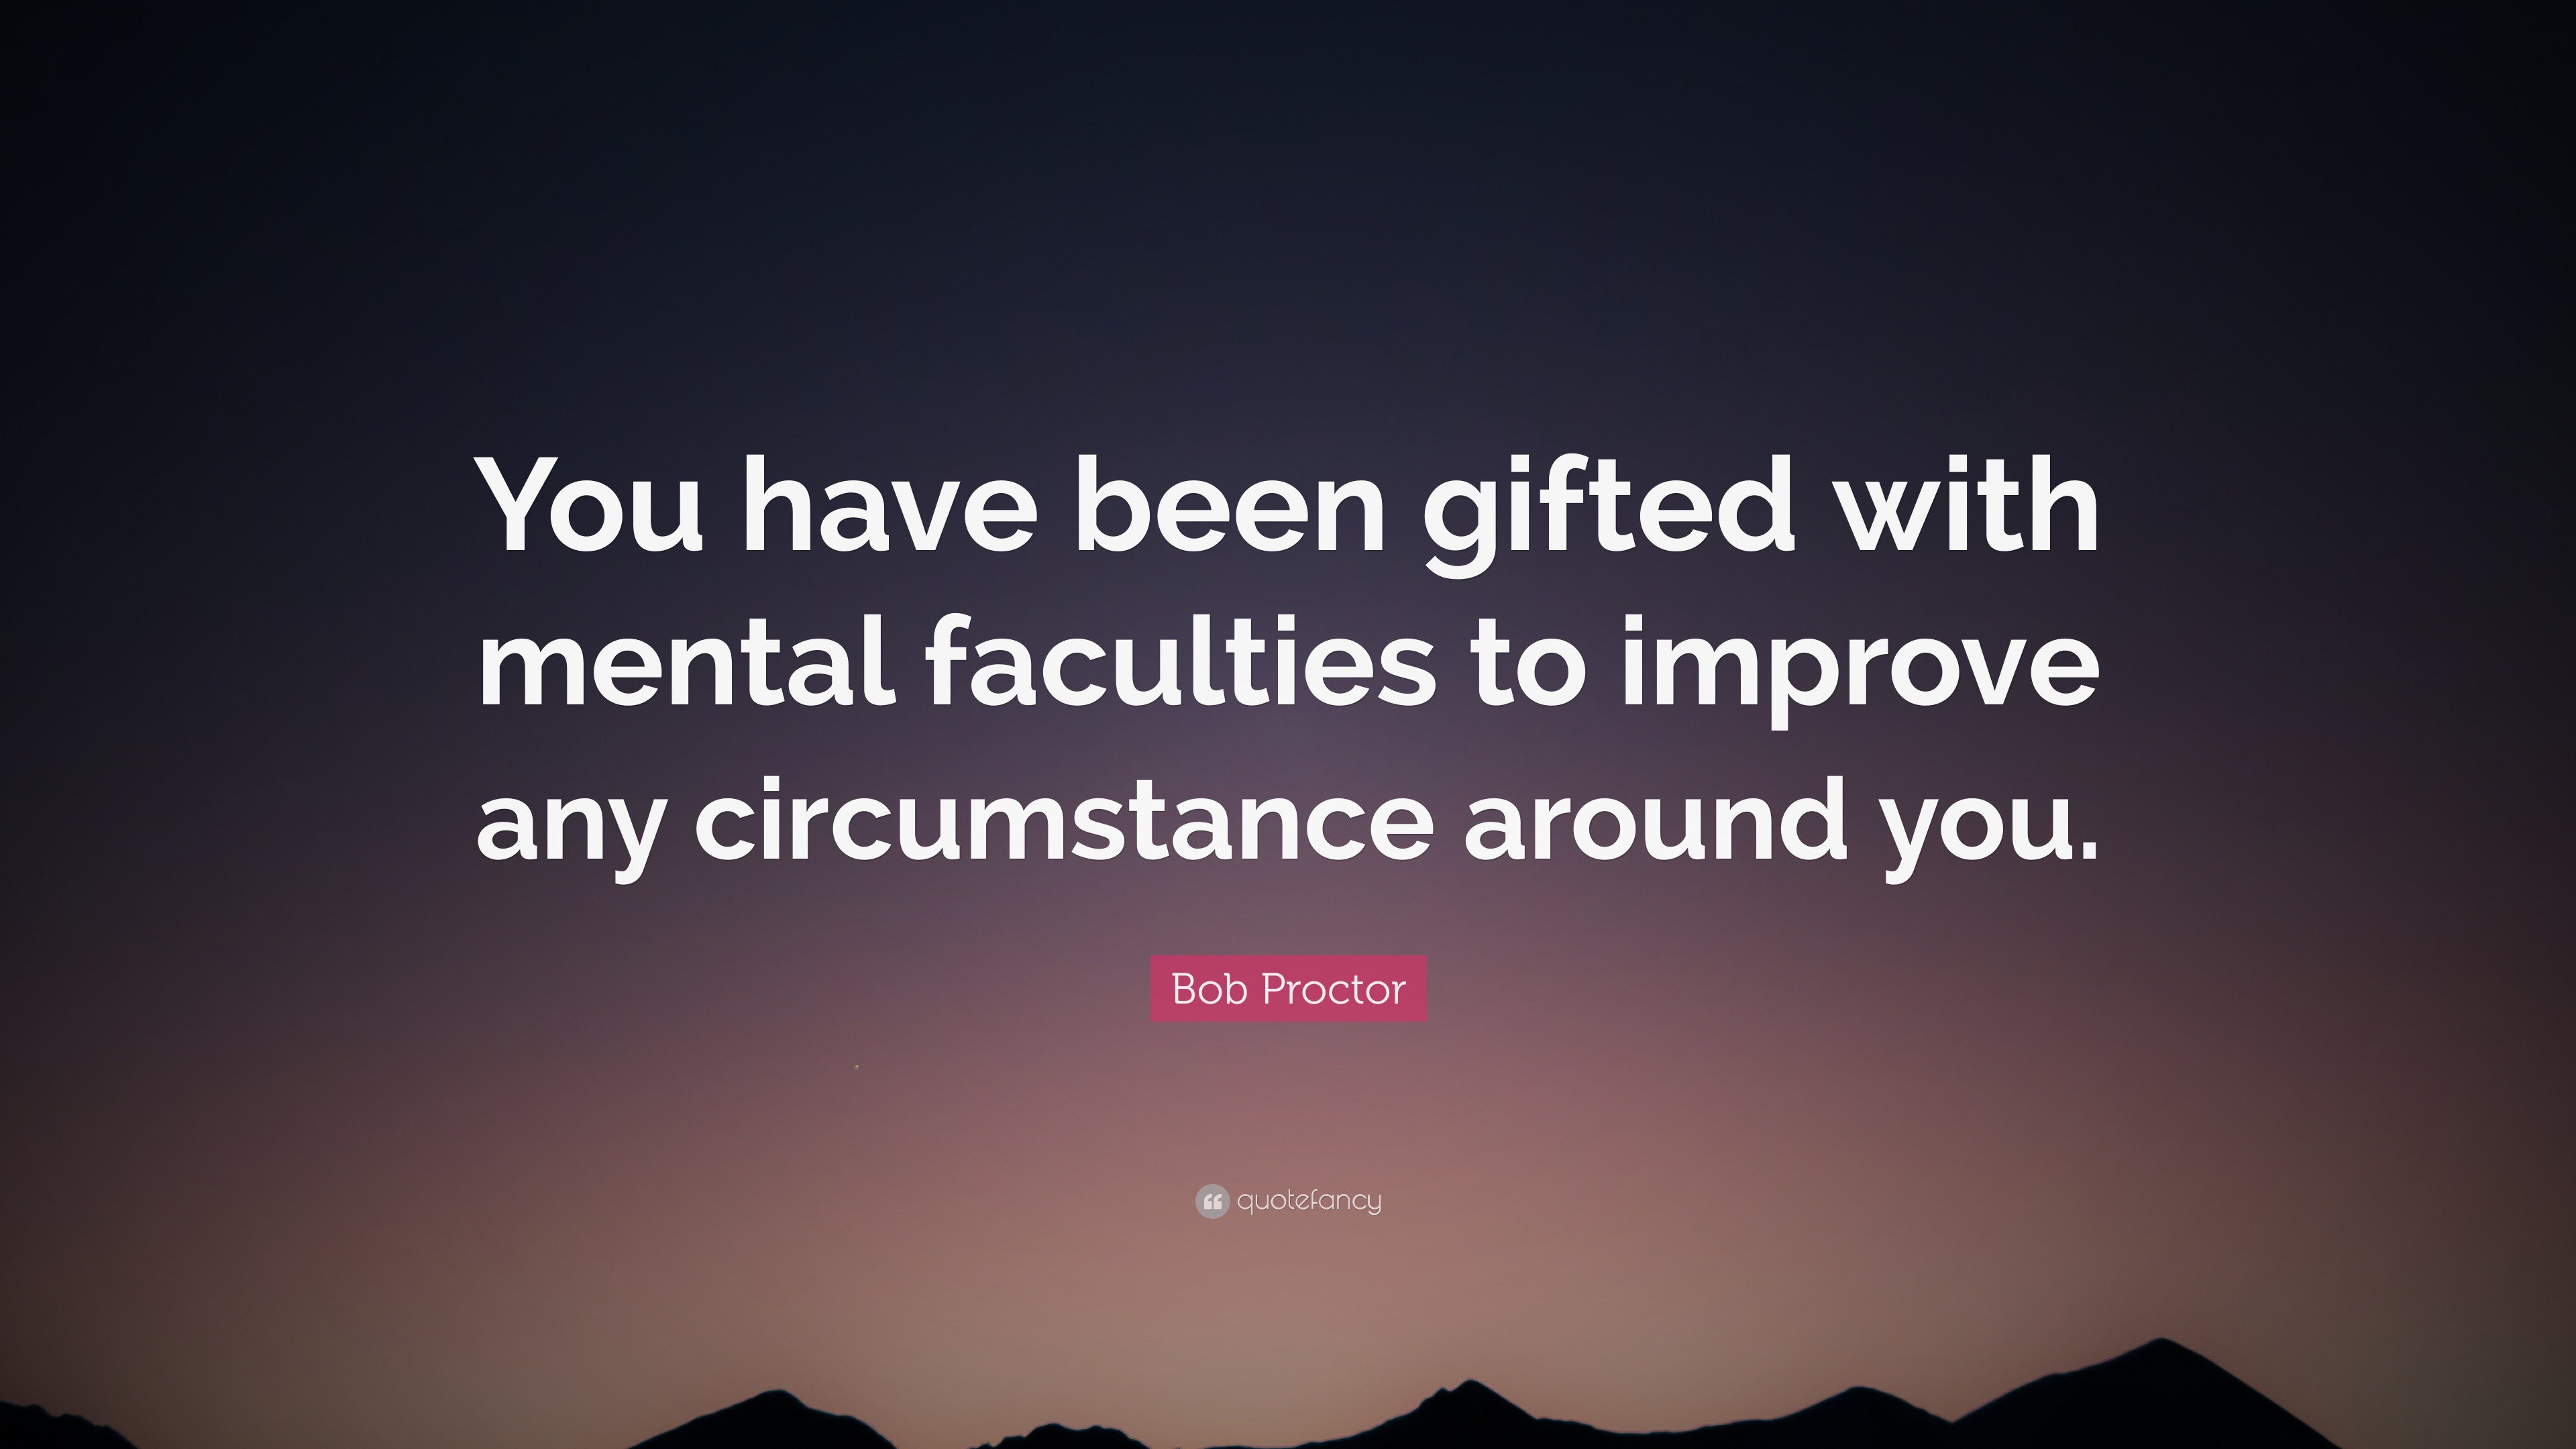 Bob Proctor Quote: “You have been gifted with mental faculties to ...